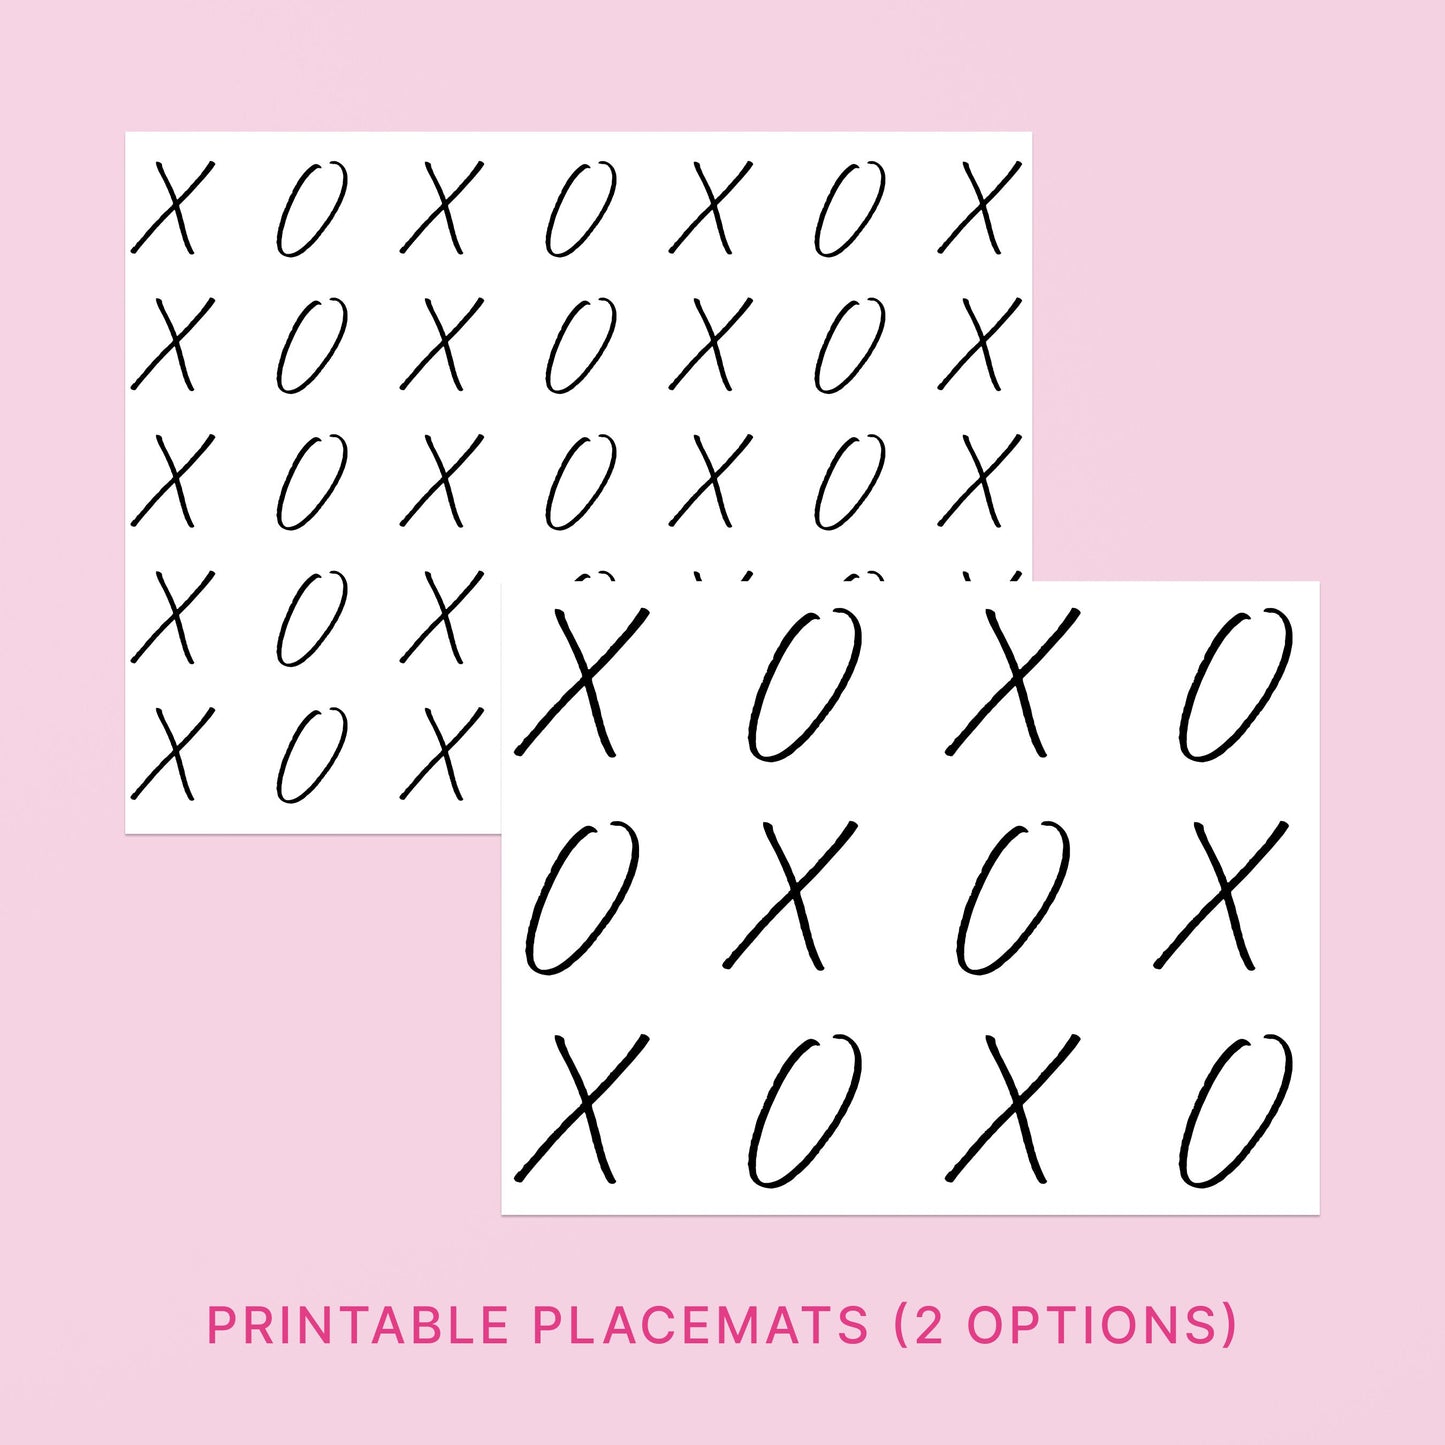 Printable Galentines Party Pack